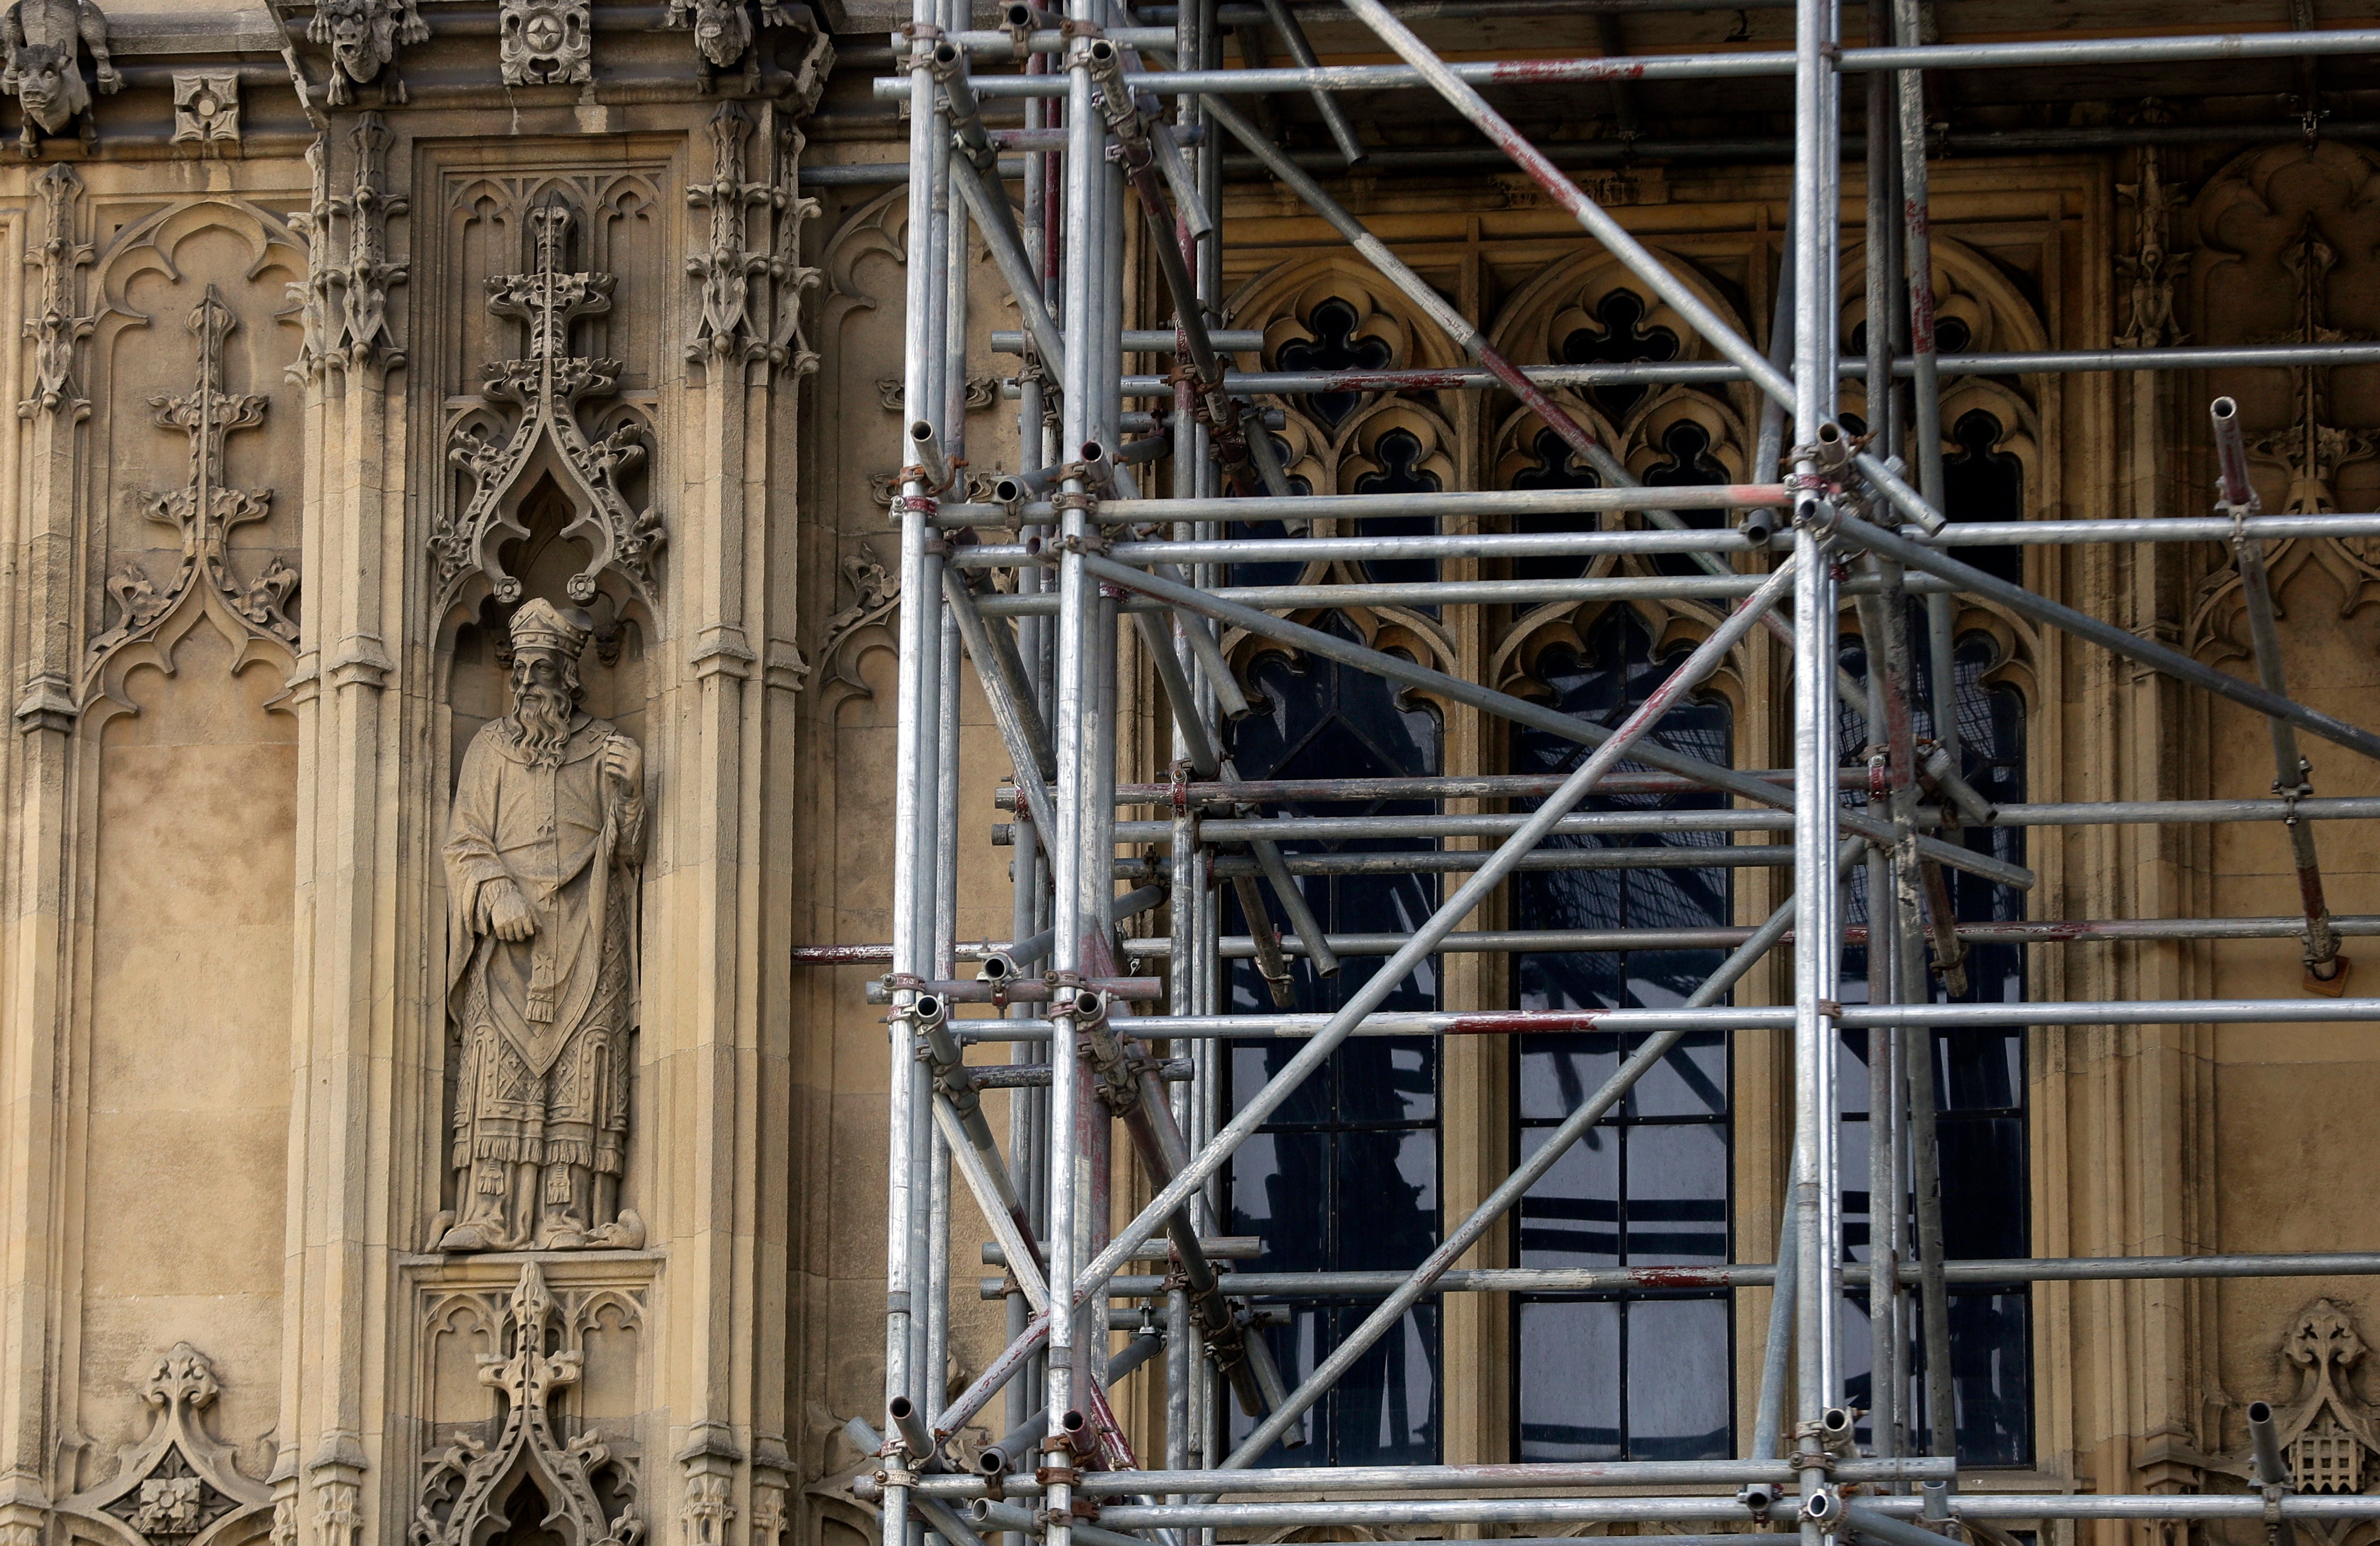 Recent restoration work in 2019 simply uncovered more problems at the Palace of Westminster